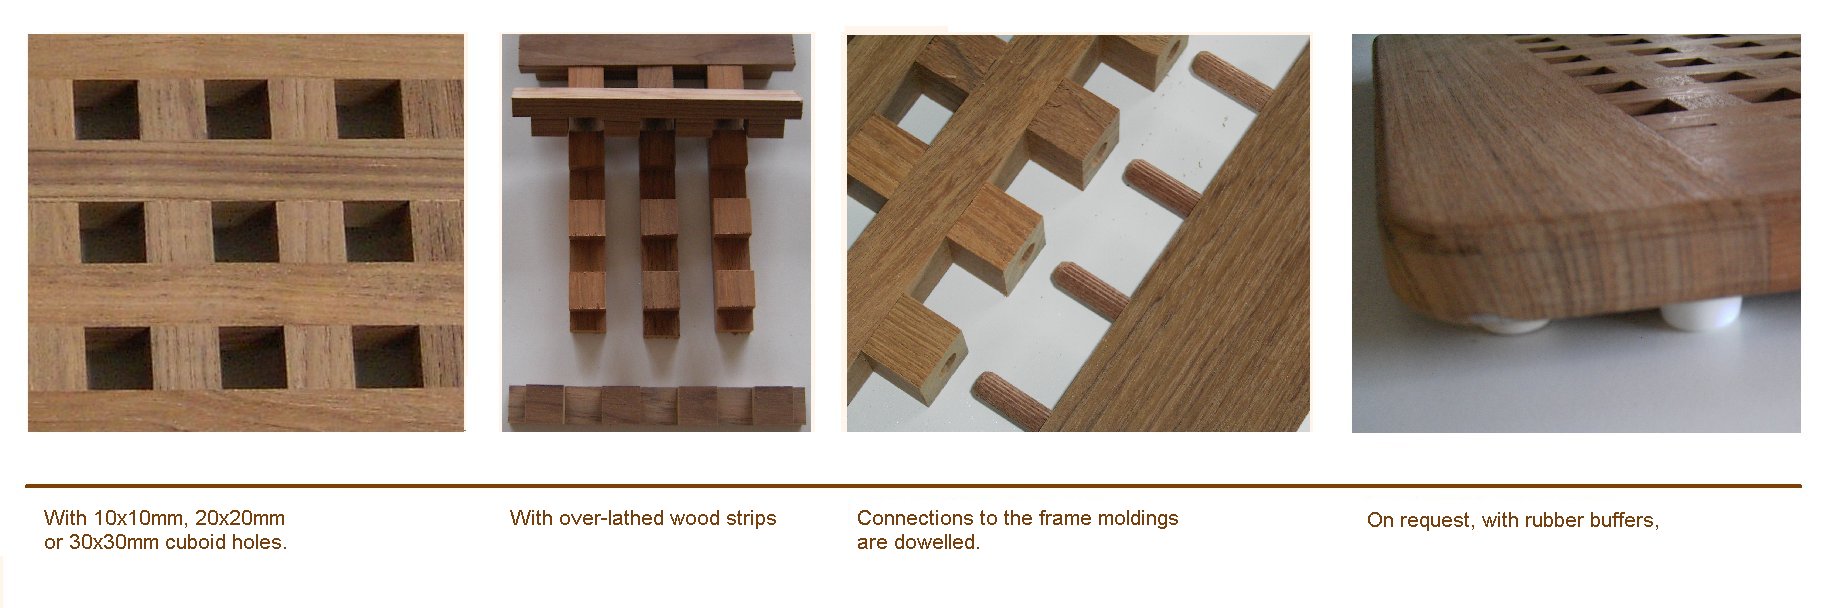 view picture, how to produce gratings